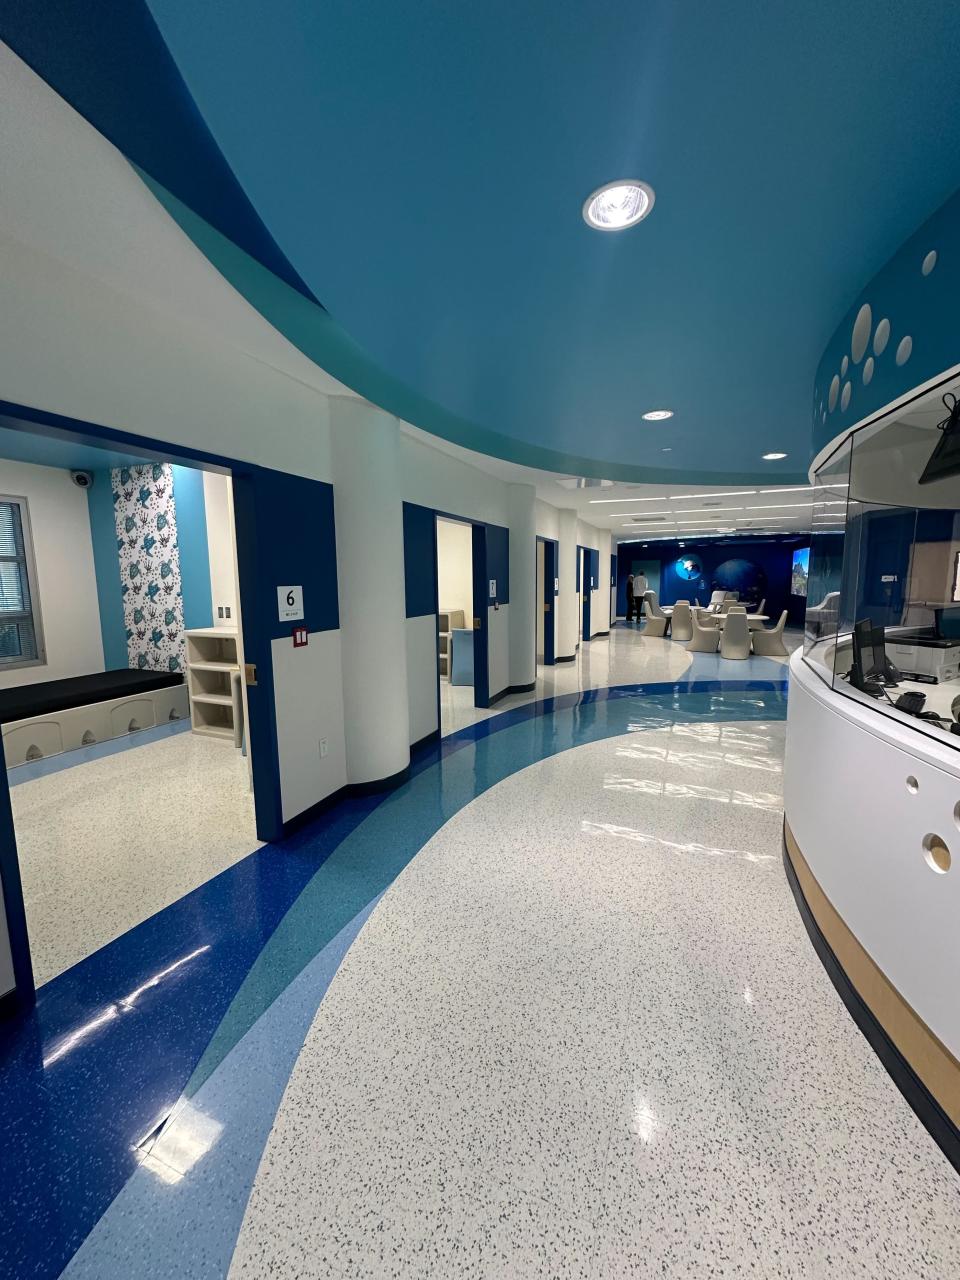 Wolfson Children's Hospital recently opened its new 20-bed inpatient behavioral health unit for children and adolescents.